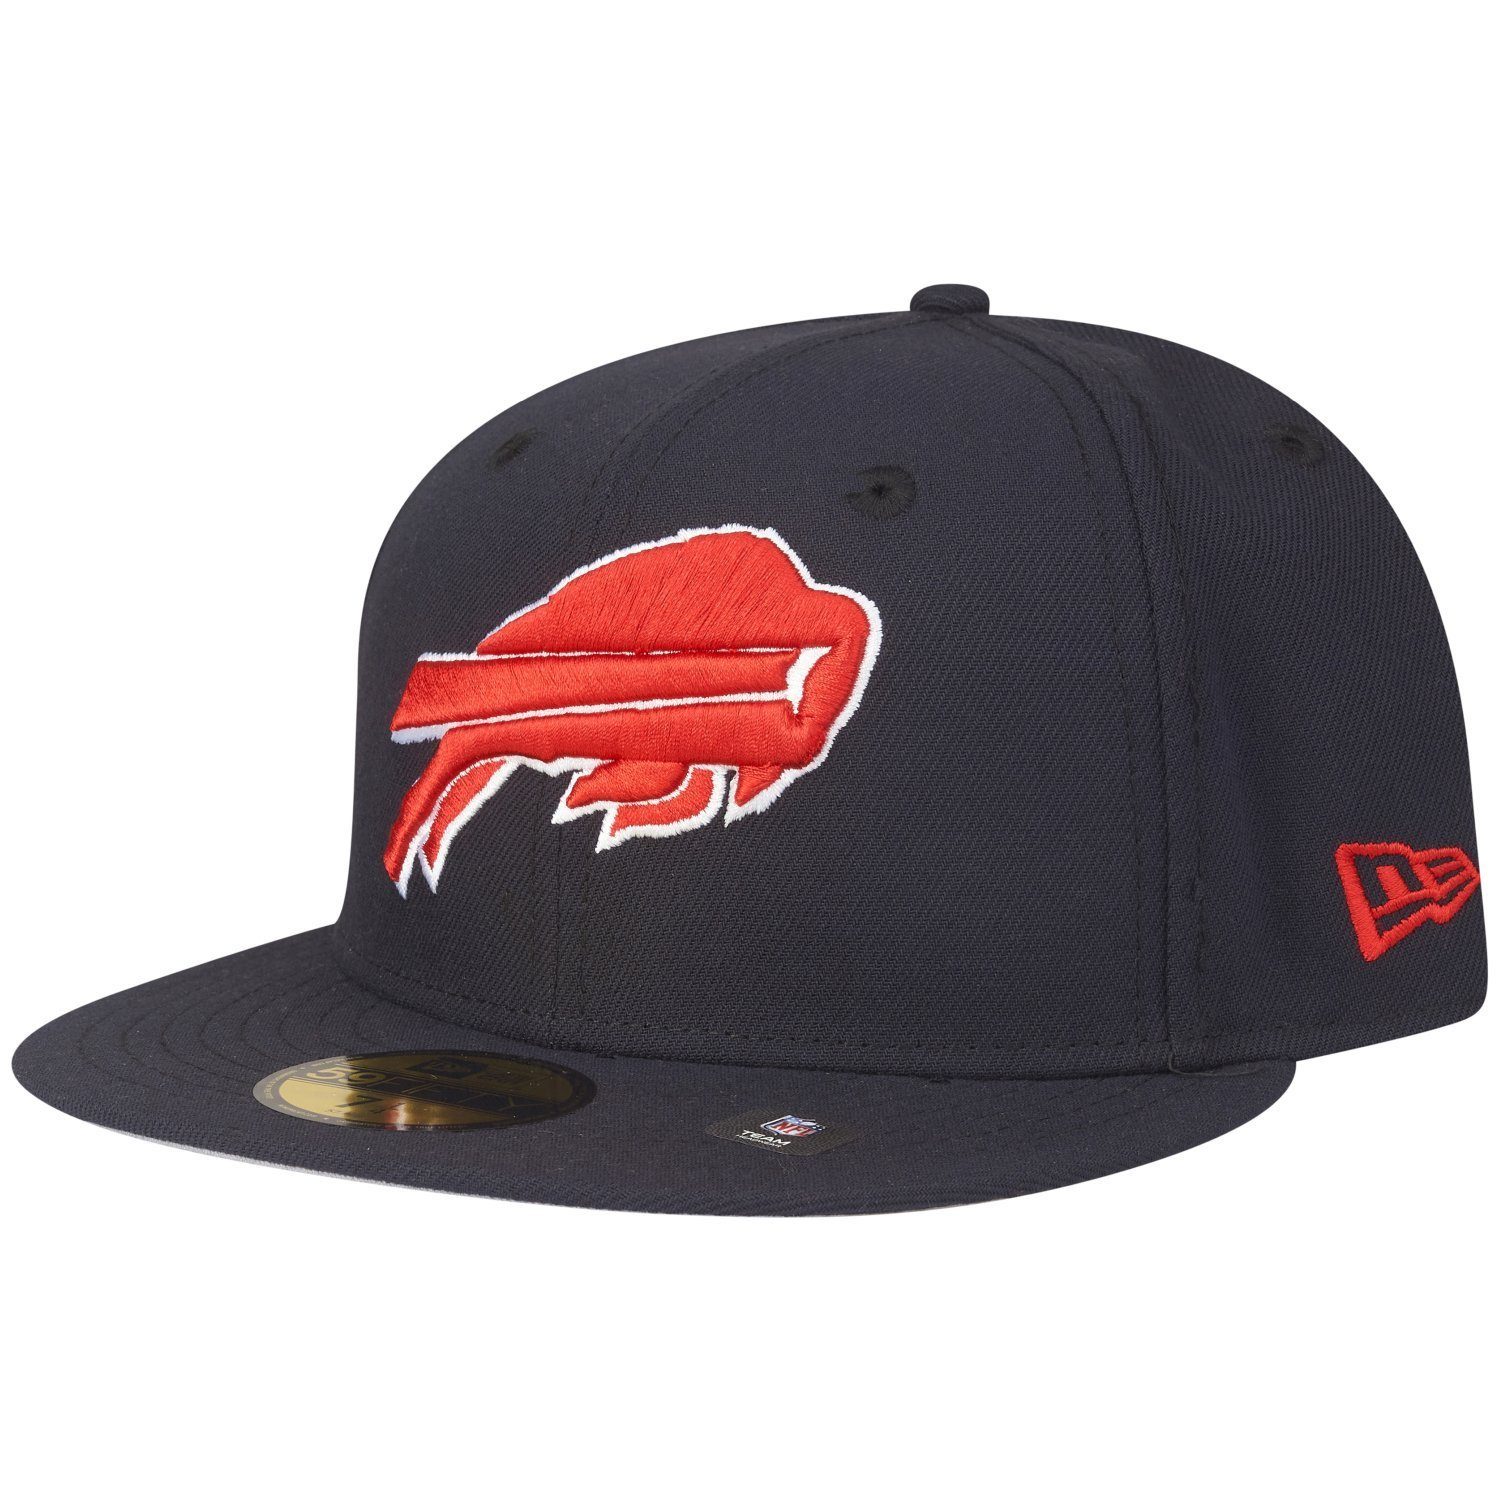 New Era Fitted Cap 59Fifty NFL TEAMS red Buffalo Bills